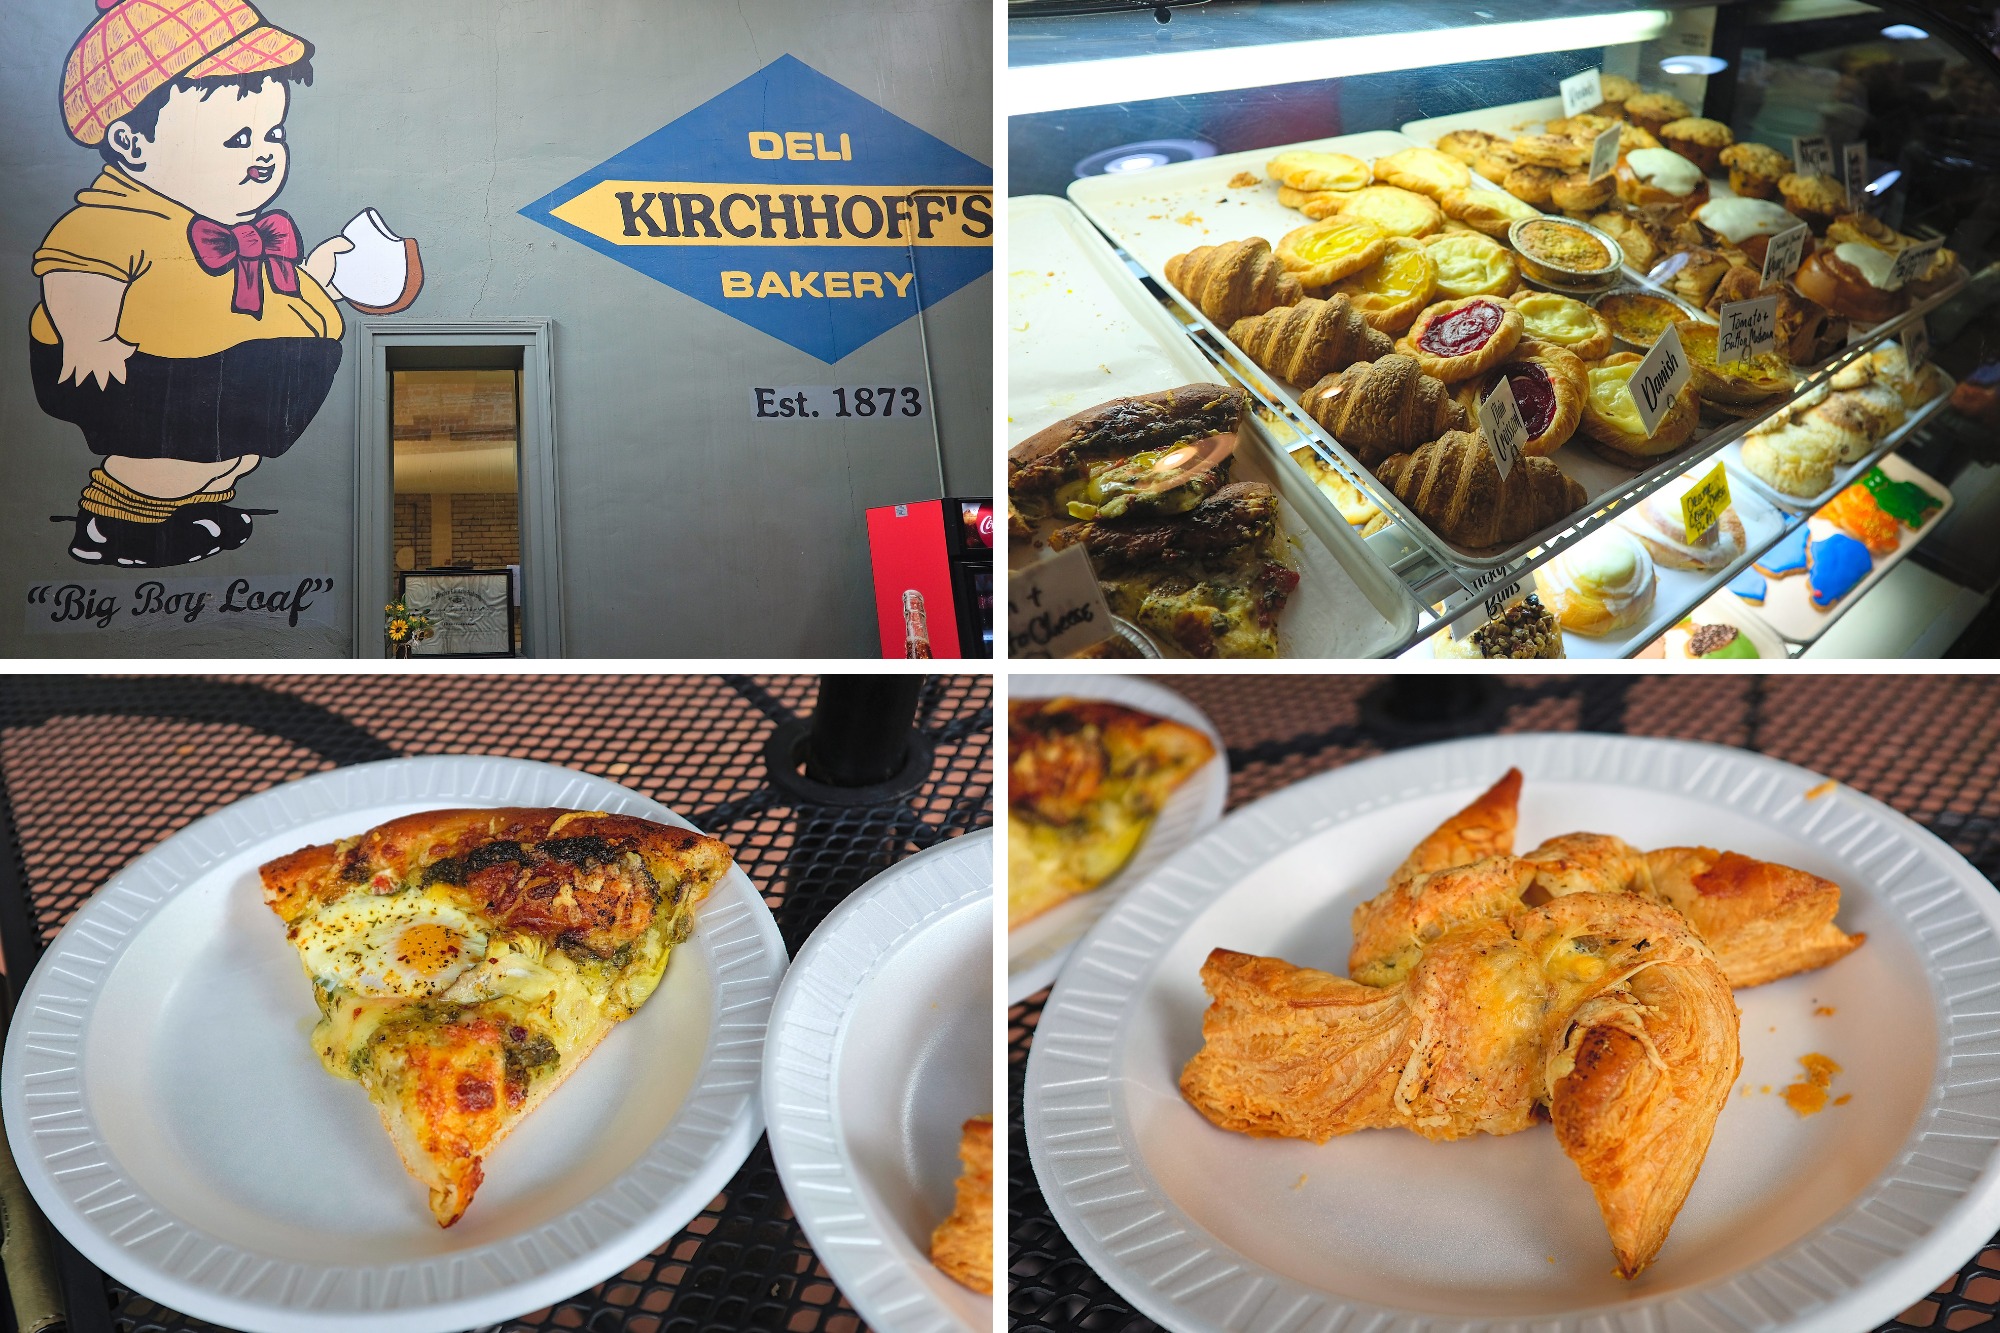 A collage of images from Kirchhoff's, including a mural on the wall, the pastry case, and two pastries